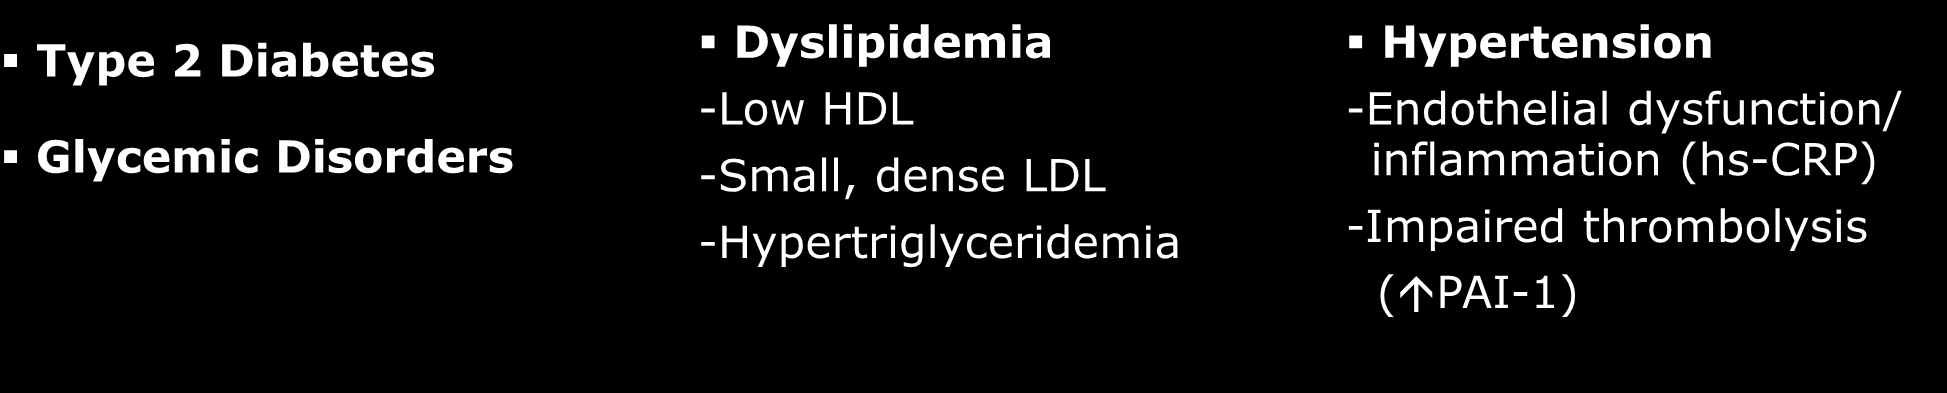 Clinical Manifestations of Insulin Resistance Visceral Adiposity Insulin Resistance Glucotoxicity; Lipotoxicity; Adiponectin Type 2 Diabetes Glycemic Disorders Dyslipidemia -Low HDL -Small, dense LDL